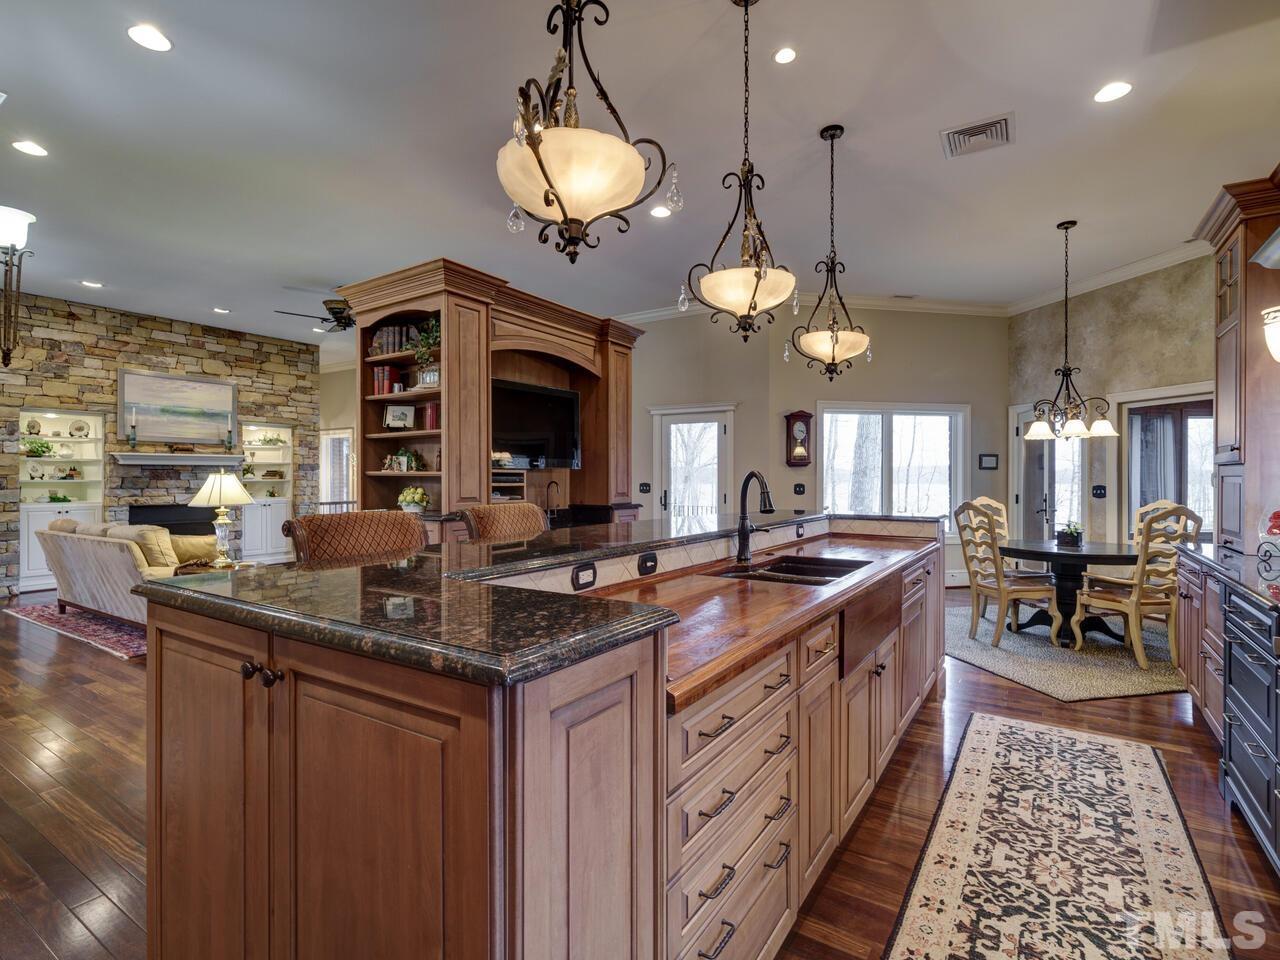 The custom Kitchen is discreetly open to overlook the Great Room.